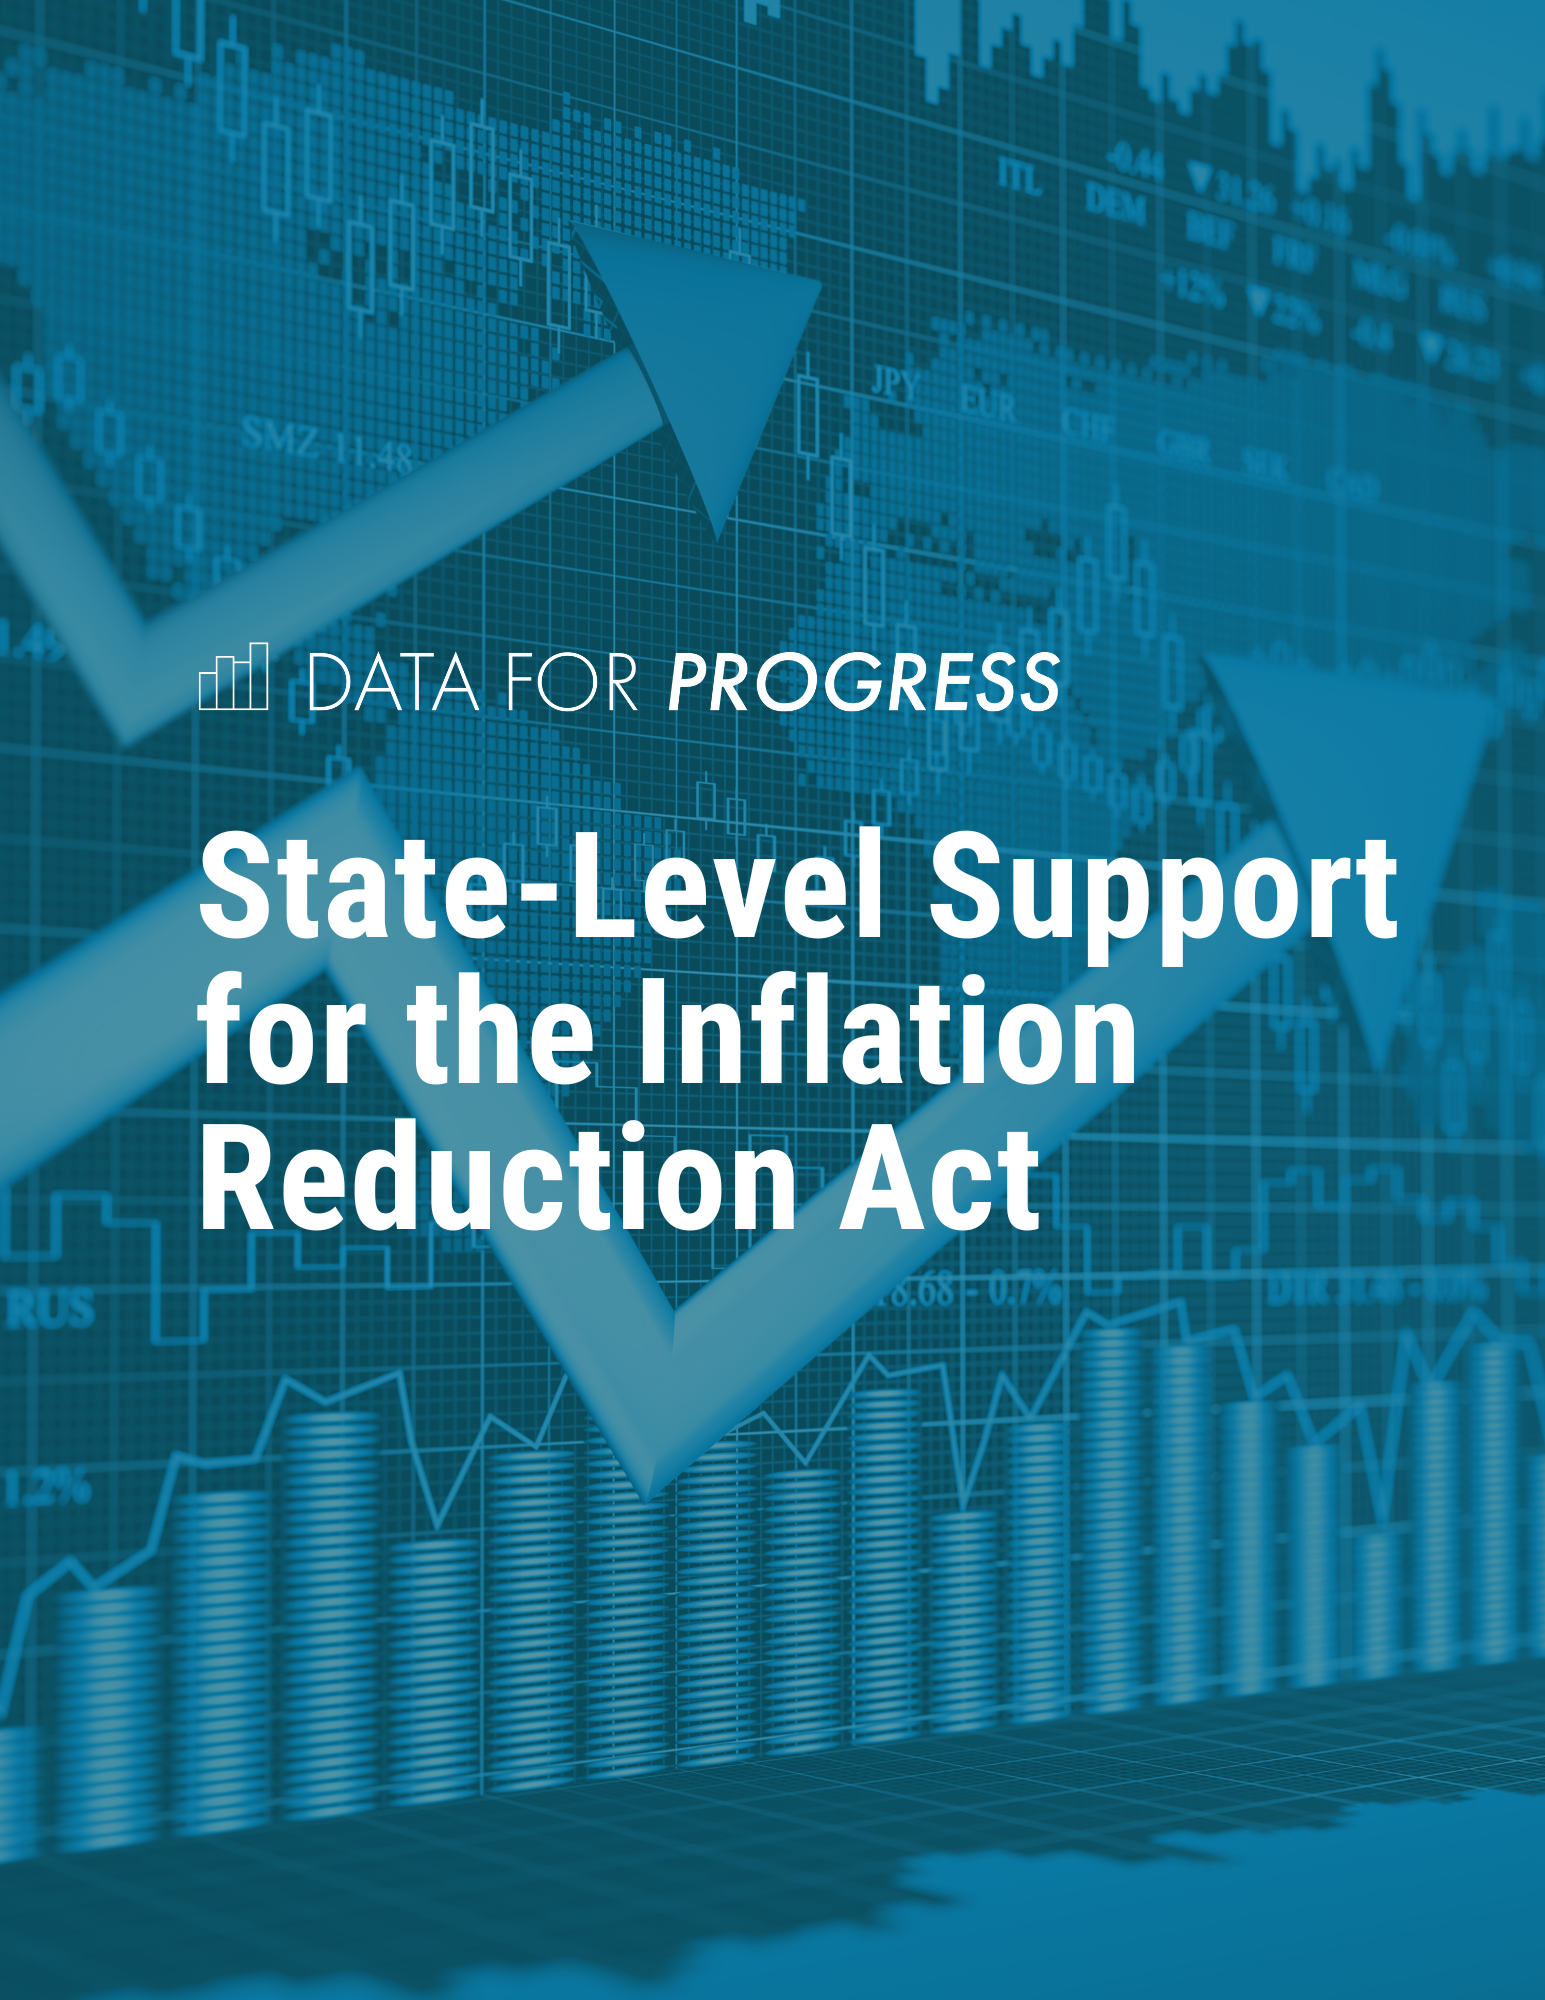 State-Level Support for the Inflation Reduction Act